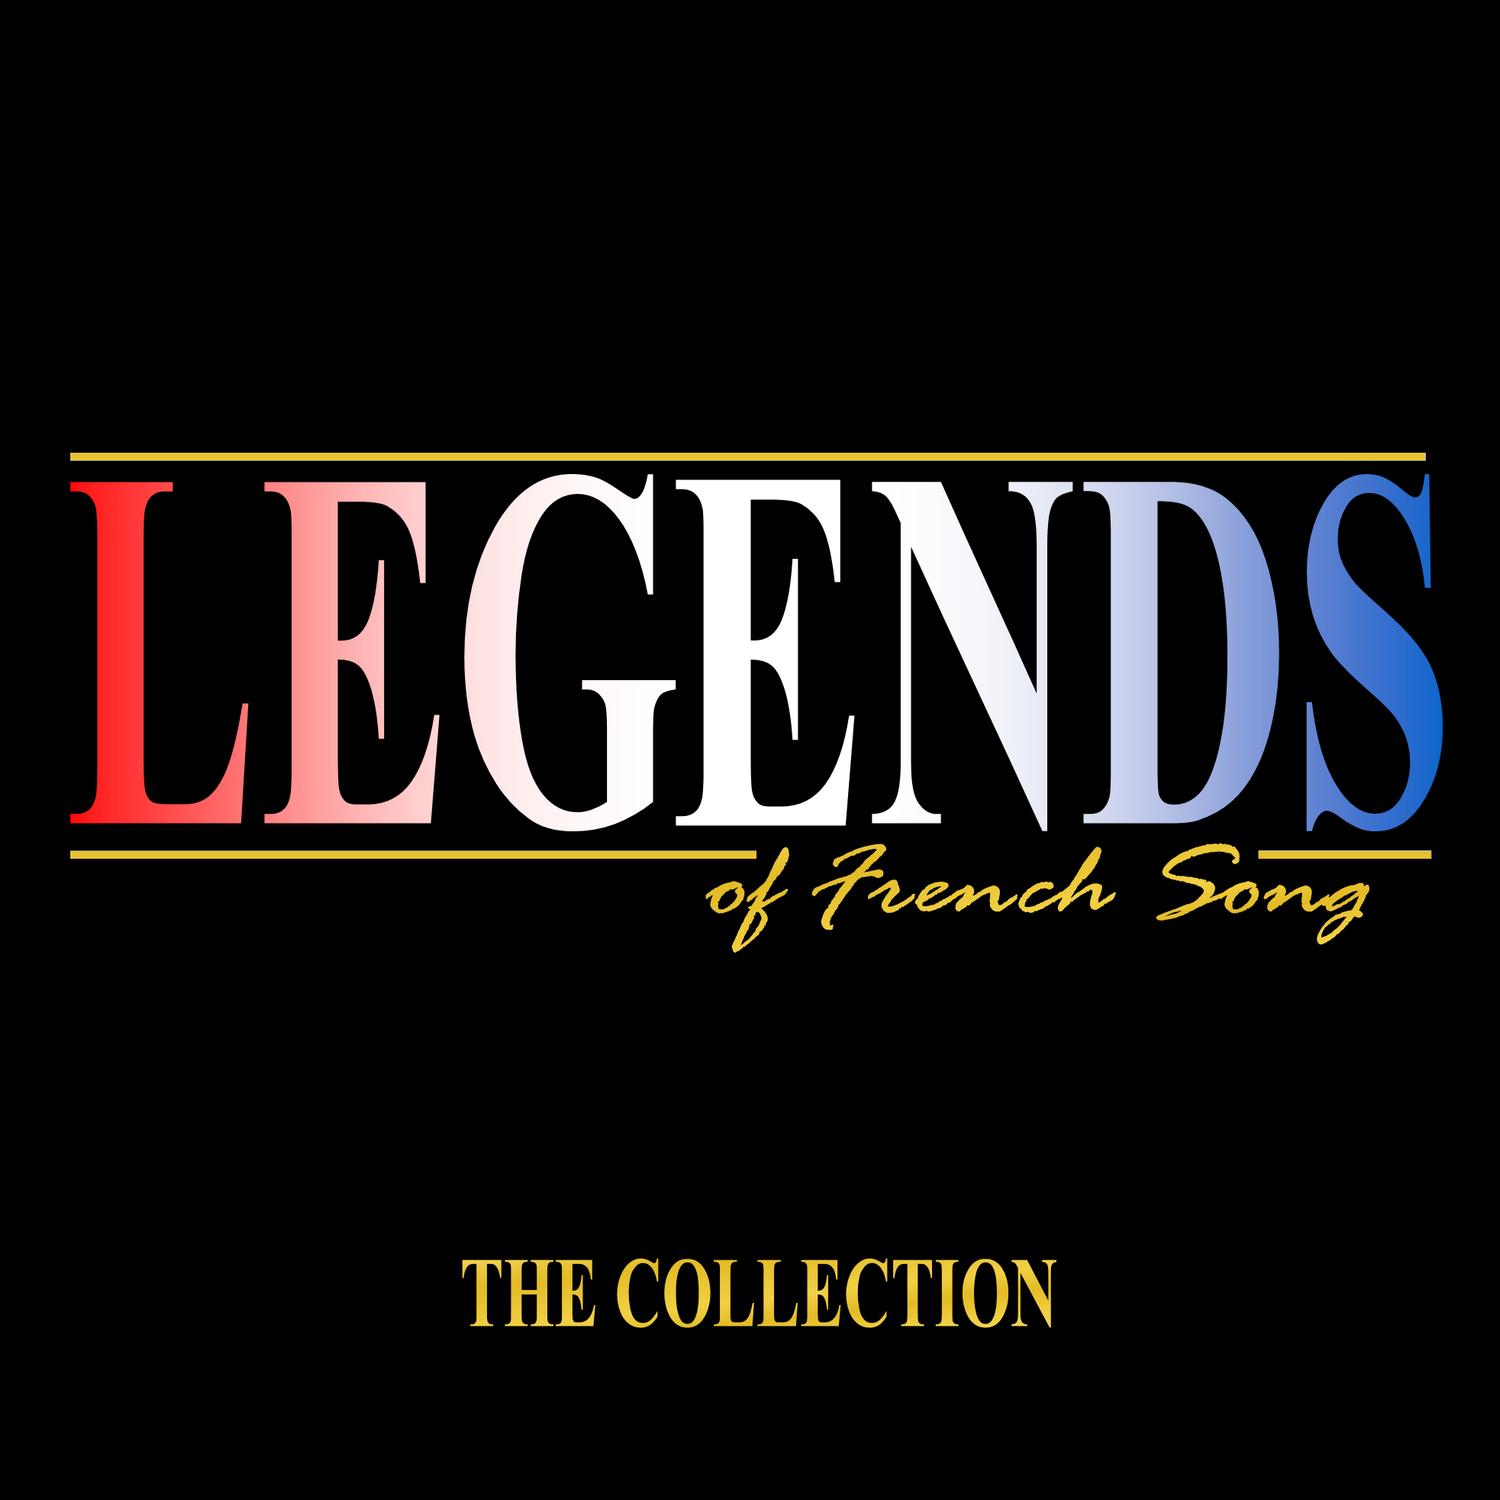 The Legends of French Song Collection